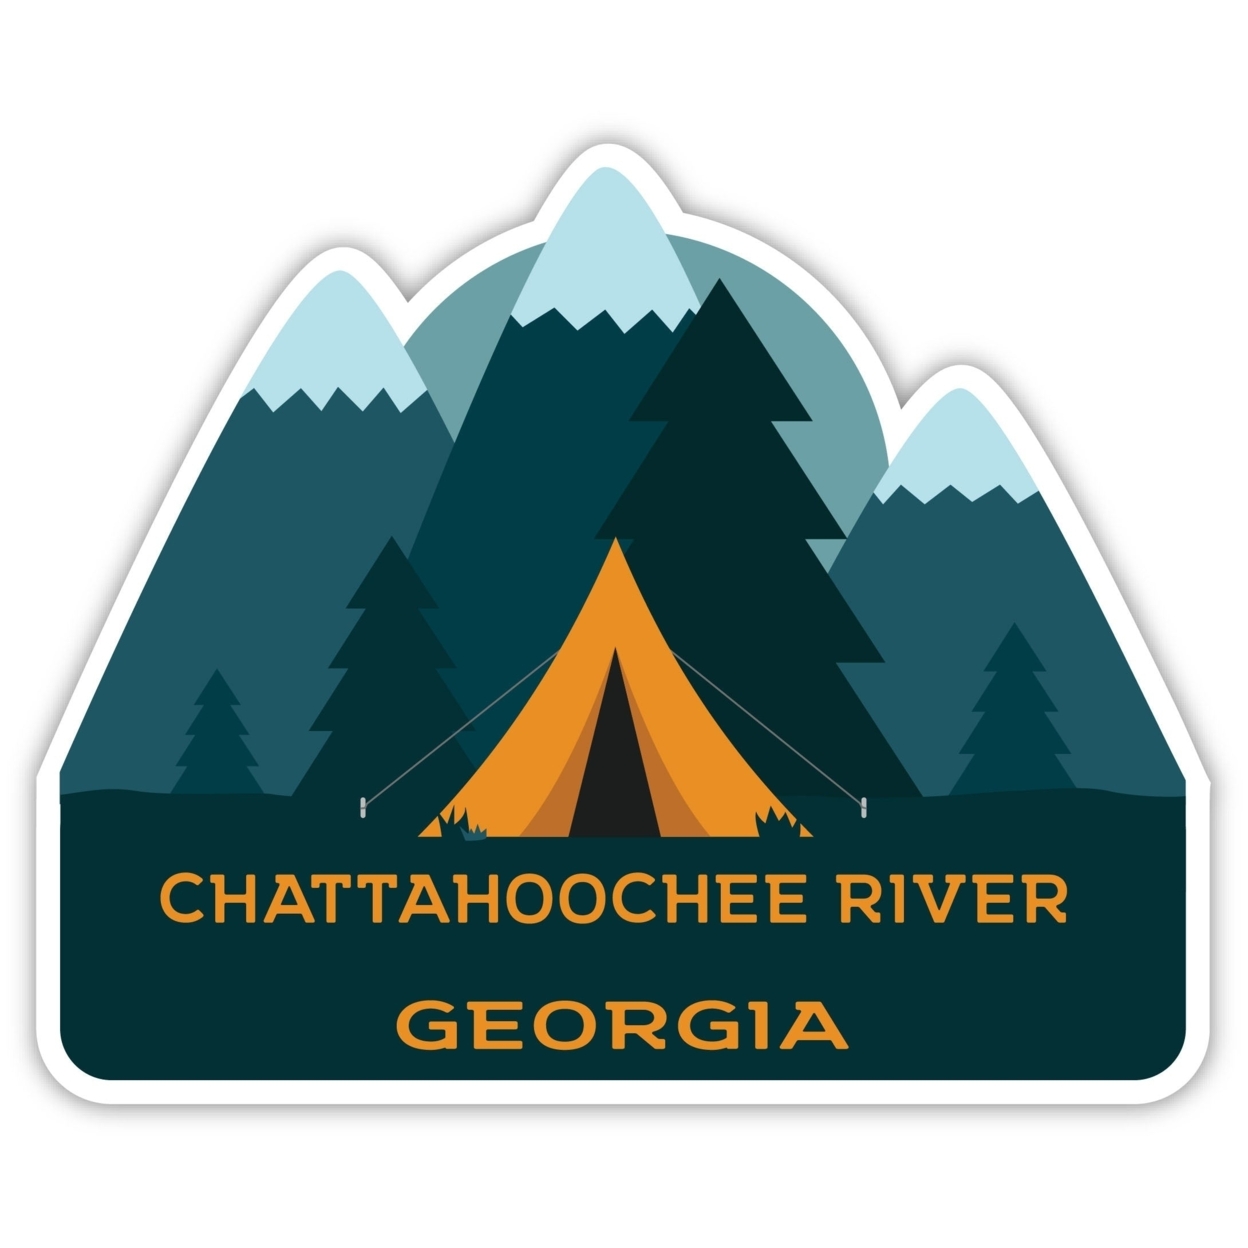 Chattahoochee River Georgia Souvenir Decorative Stickers (Choose Theme And Size) - 4-Pack, 2-Inch, Tent